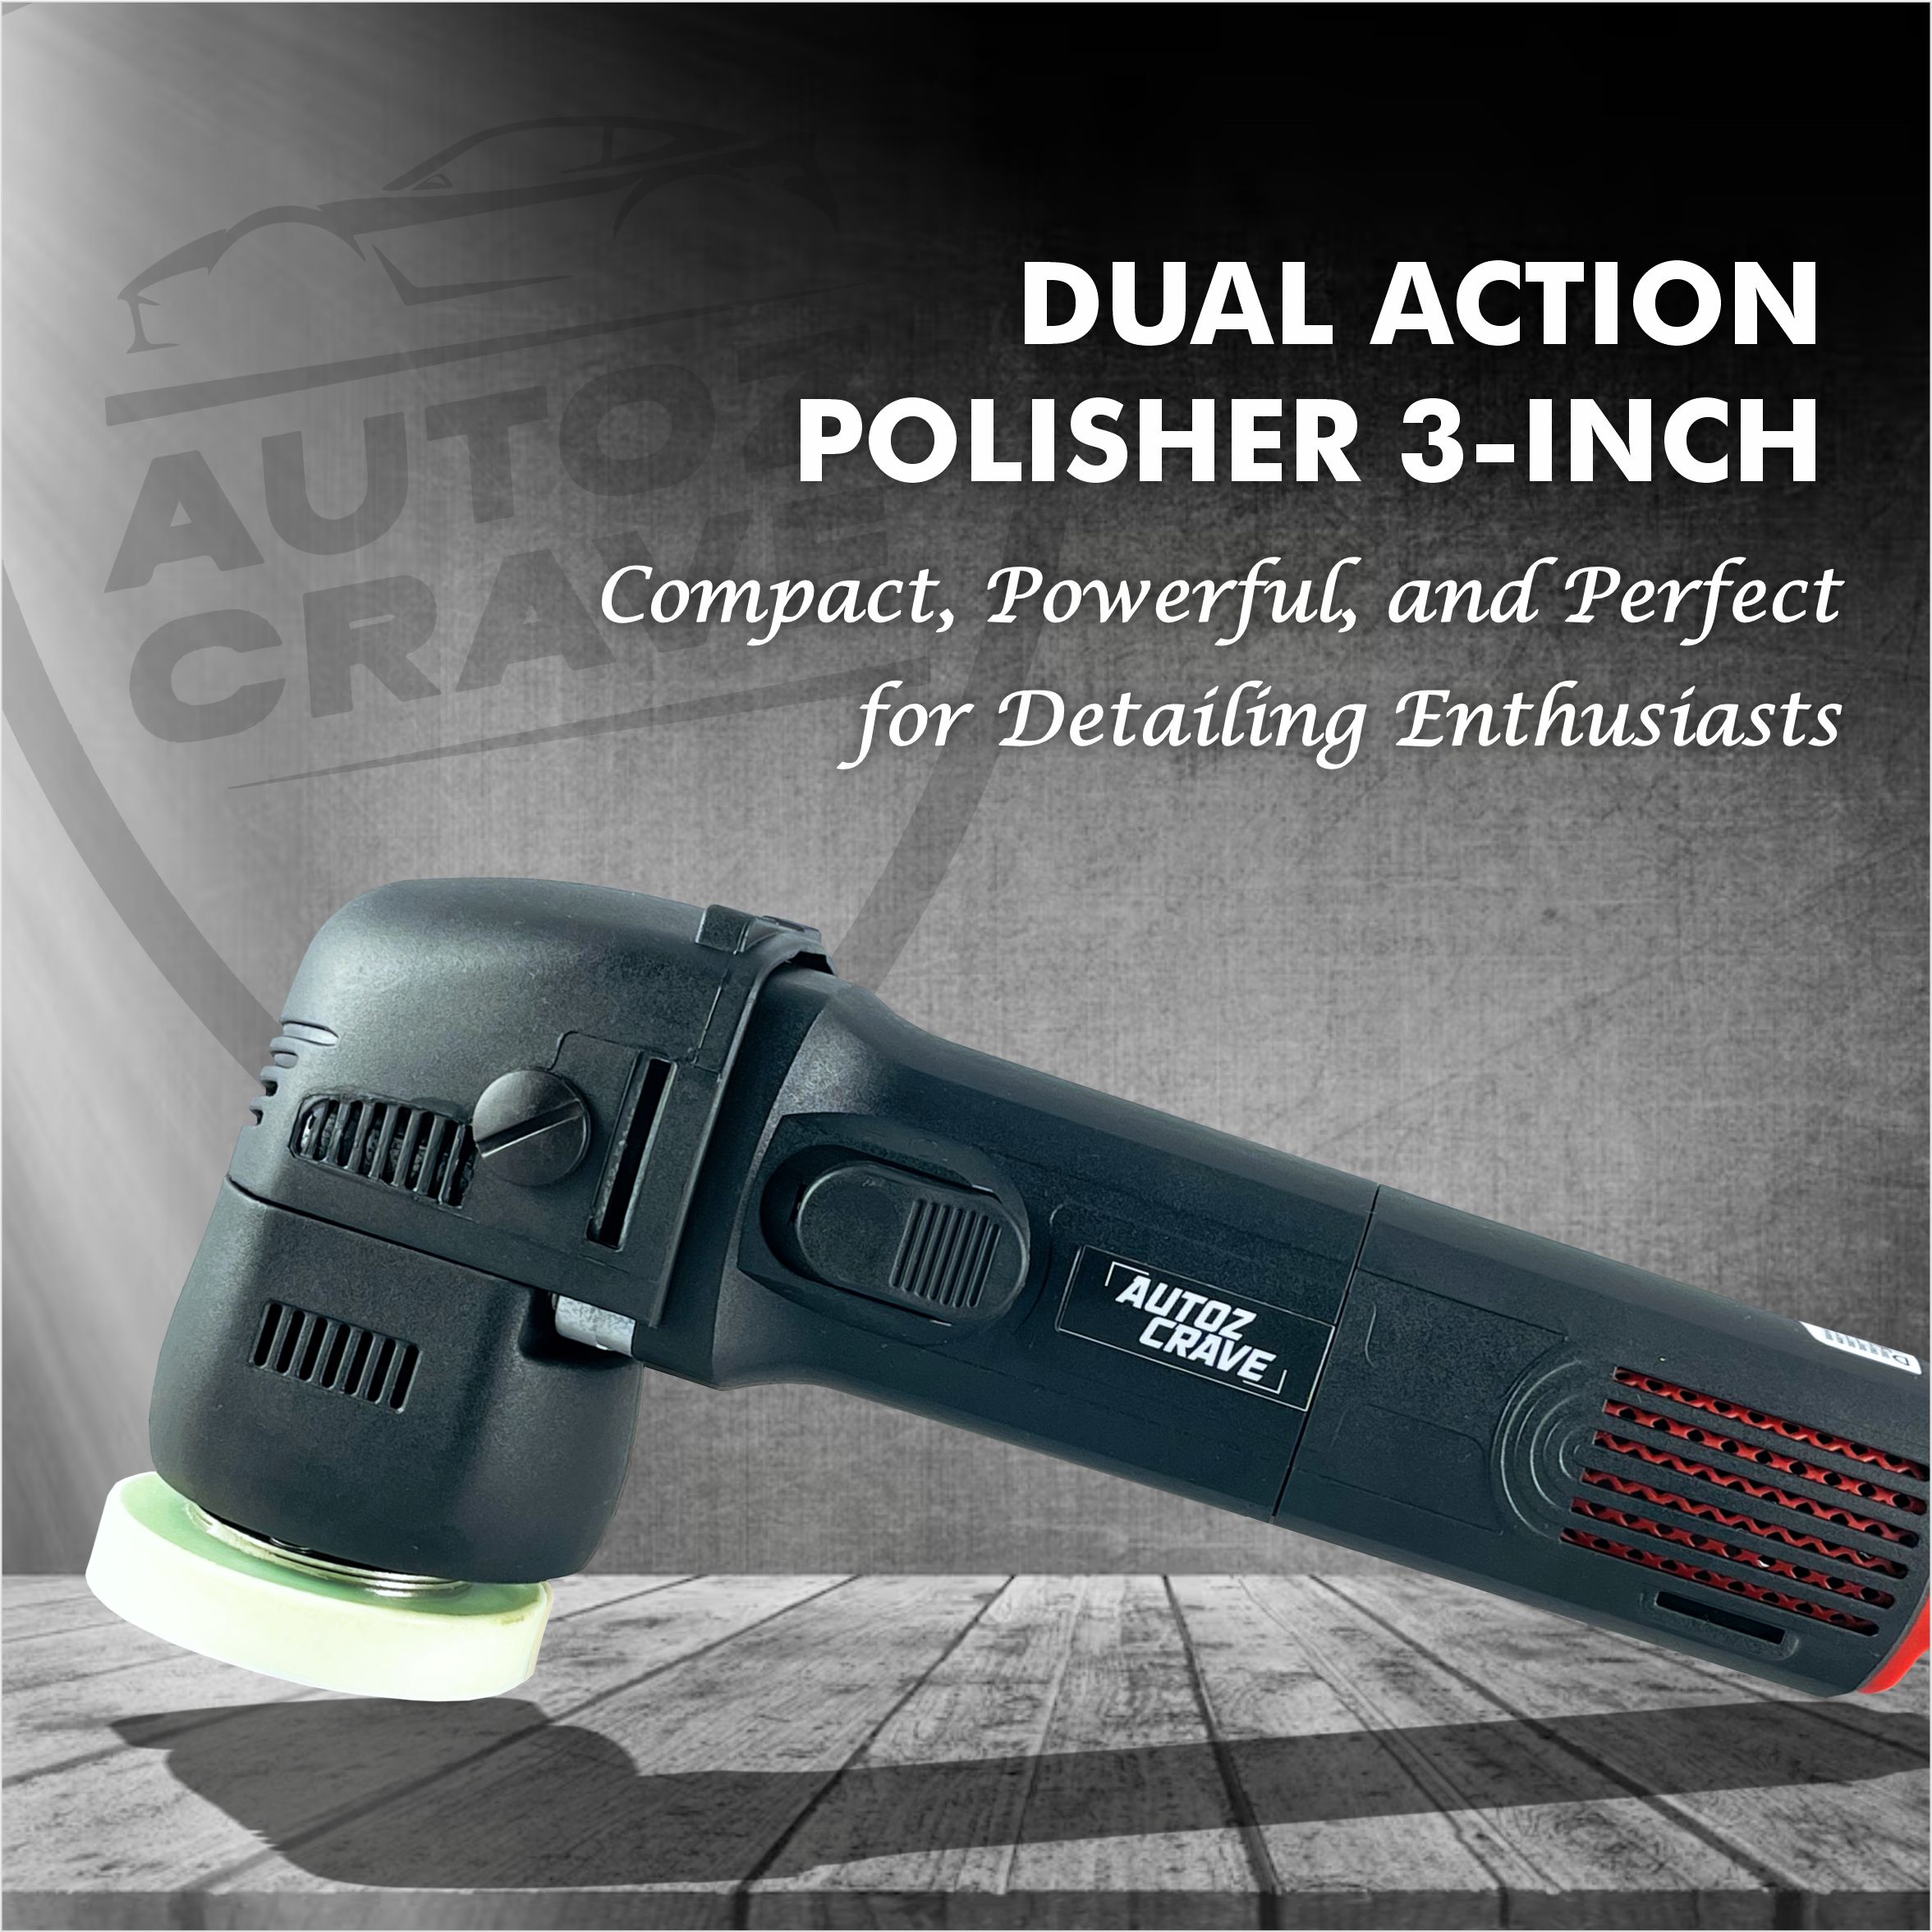 BEST DUAL ACTION POLISHER FOR CAR DETAILING (3 INCH)